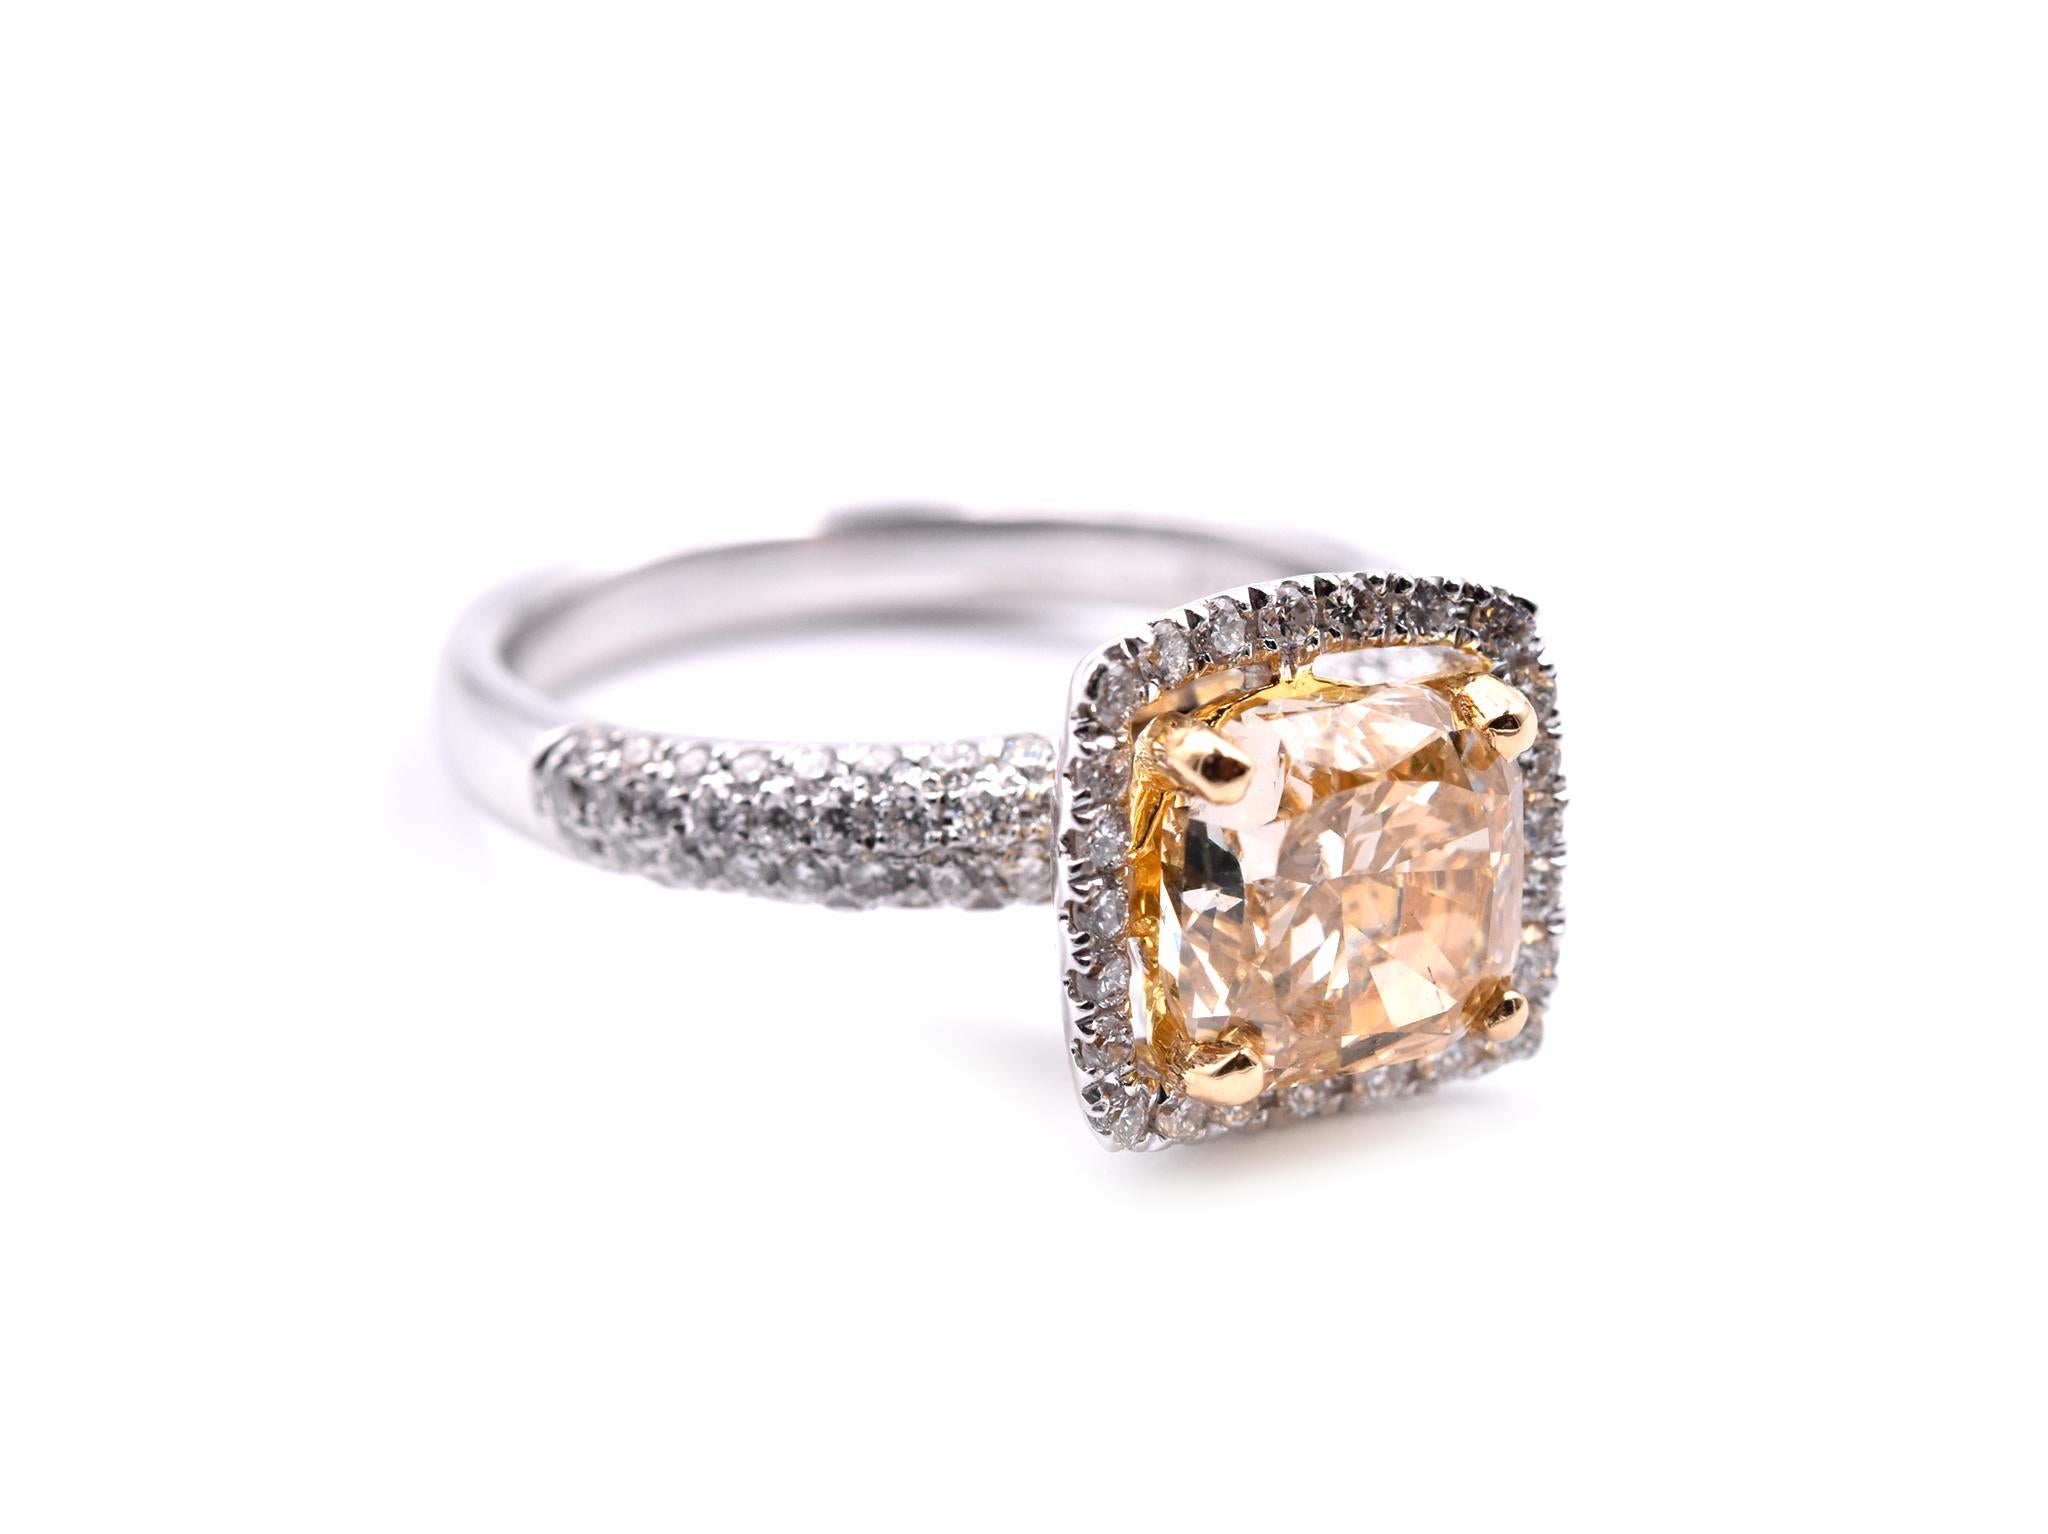 Designer: custom design
Material: 18k white gold
Fancy Yellow Diamond: 1 cushion cut= 1.72ct
Color: fancy yellow
Clarity: VS2
Diamonds: 103 round brilliant cut= .59cttw
Color: G
Clarity: VS
Ring Size: 6 ½ (please allow two additional shipping days